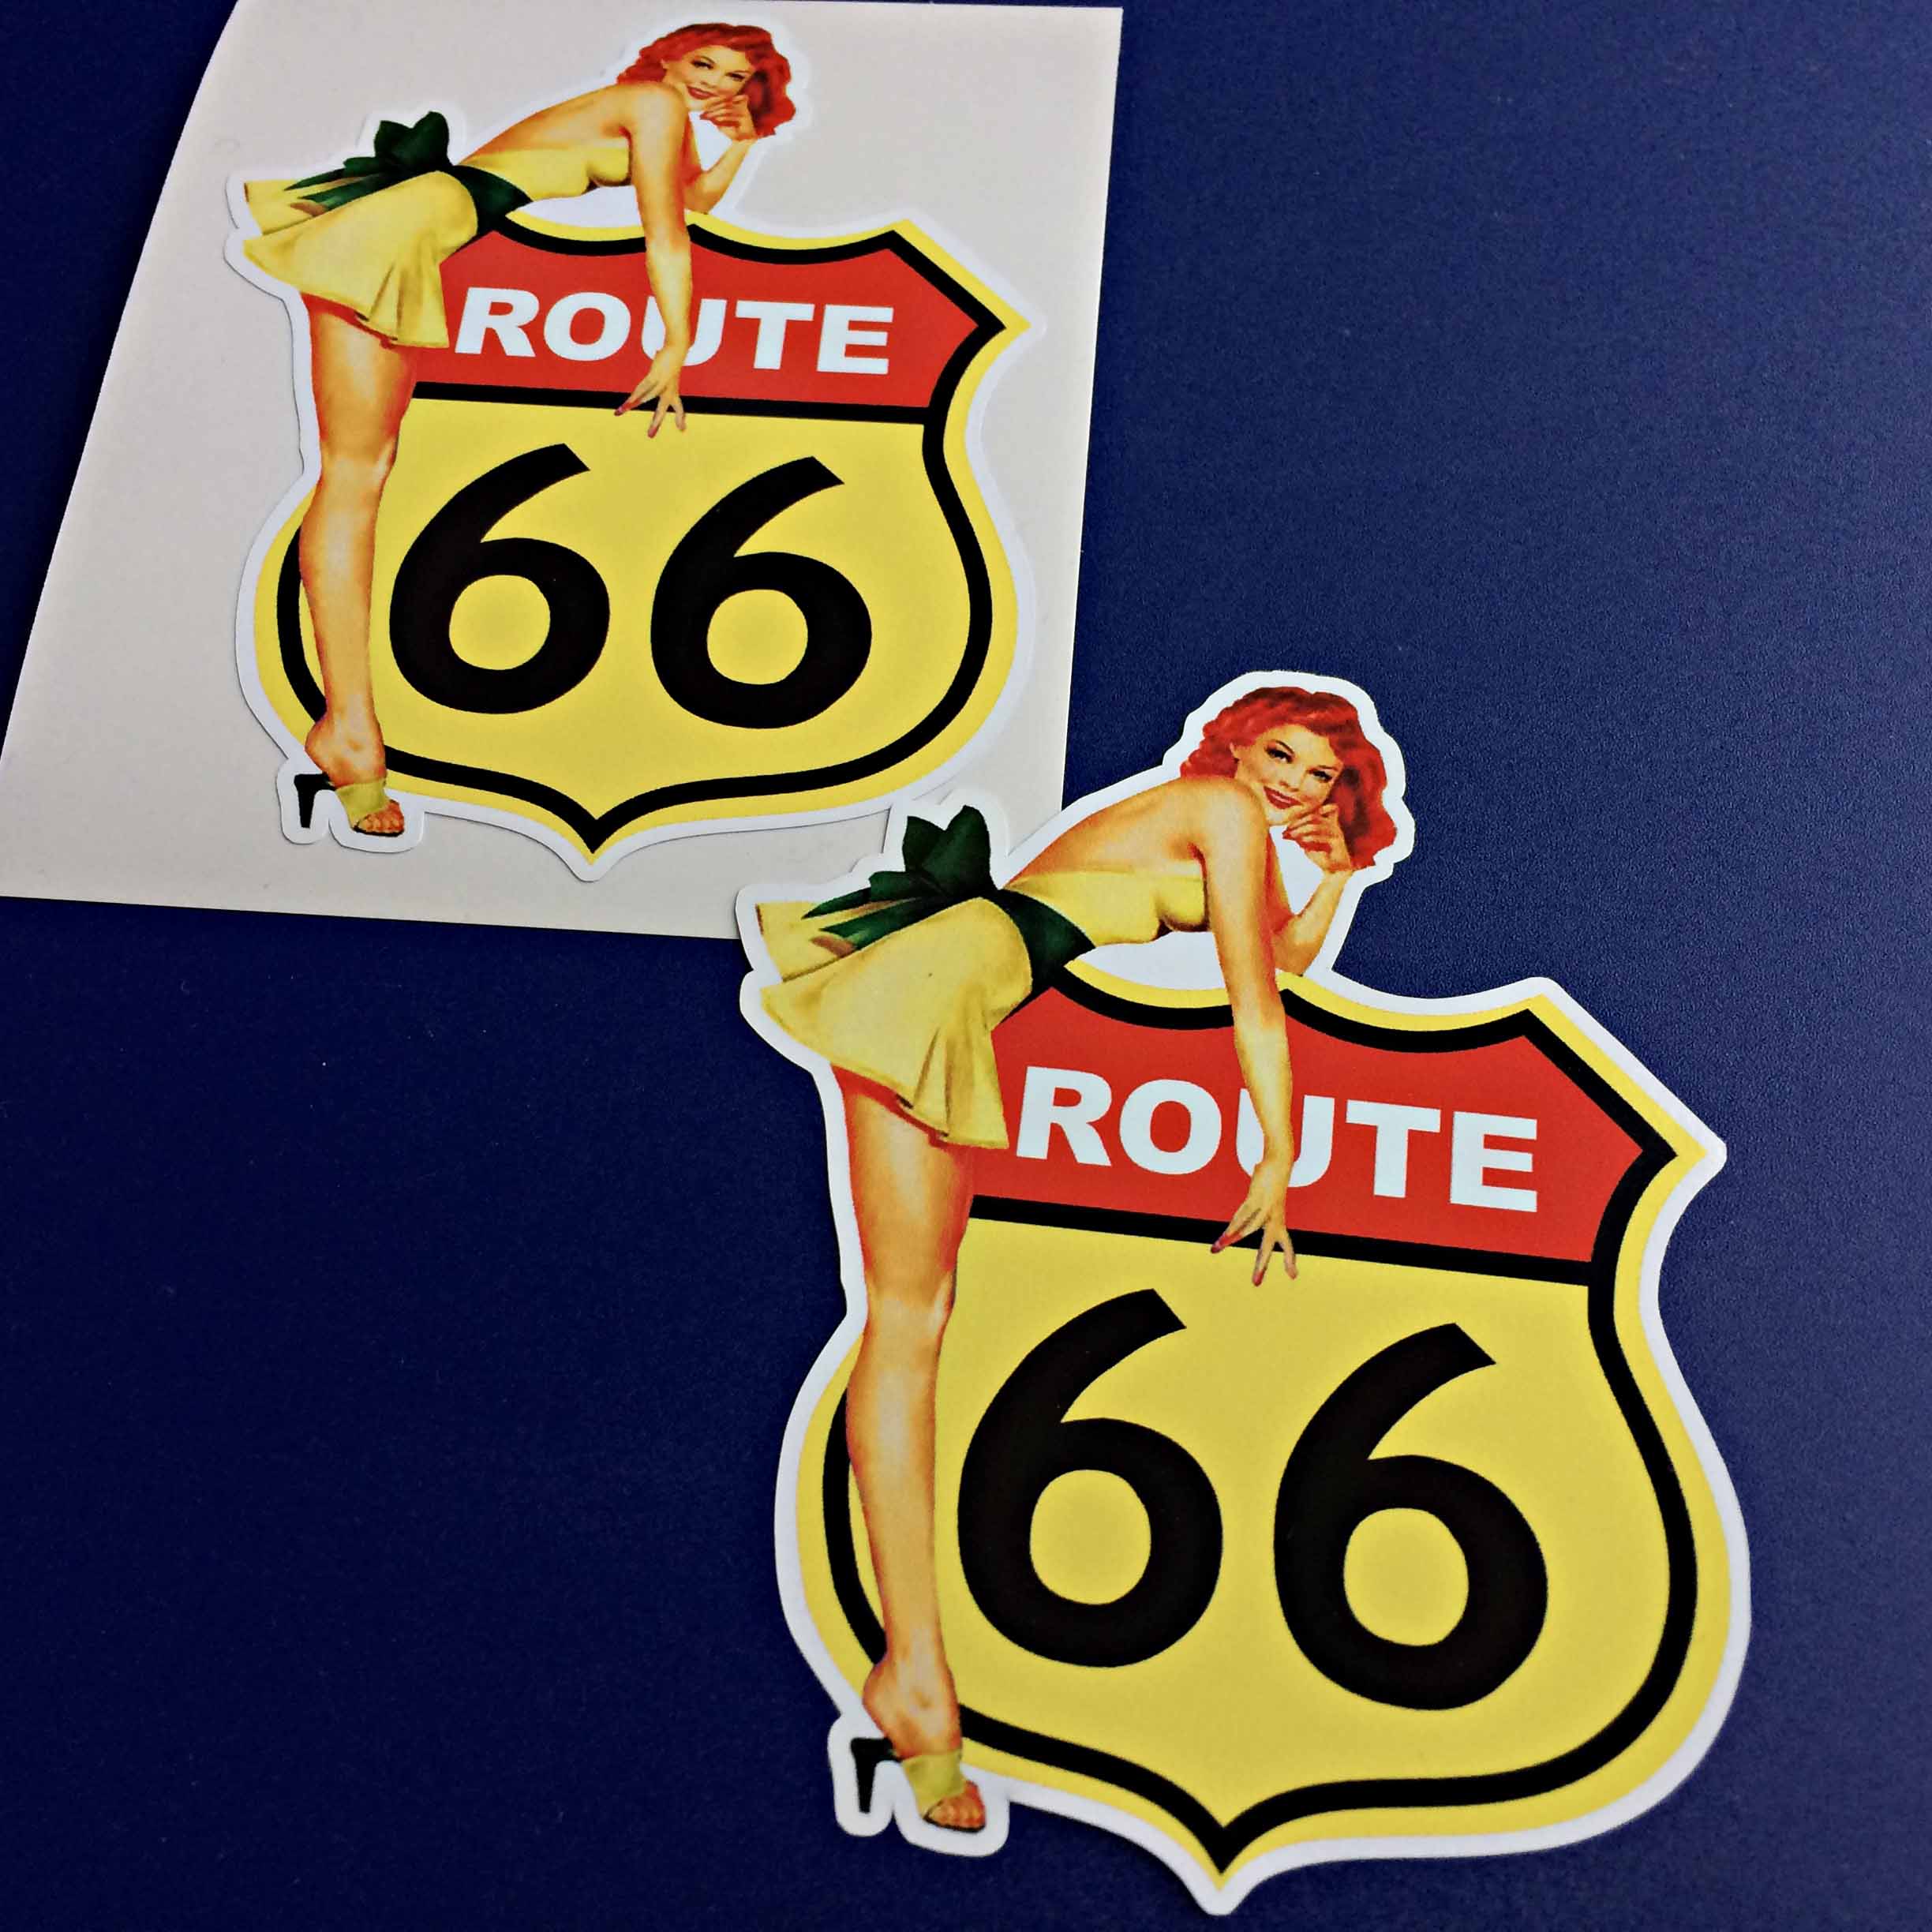 ROUTE 66 AND STANDING MODEL STICKERS. Route 66 sign in yellow. Route white lettering on red and 66 in bold black. A model wearing a short yellow dress with a black bow and yellow heels leans over the sign.